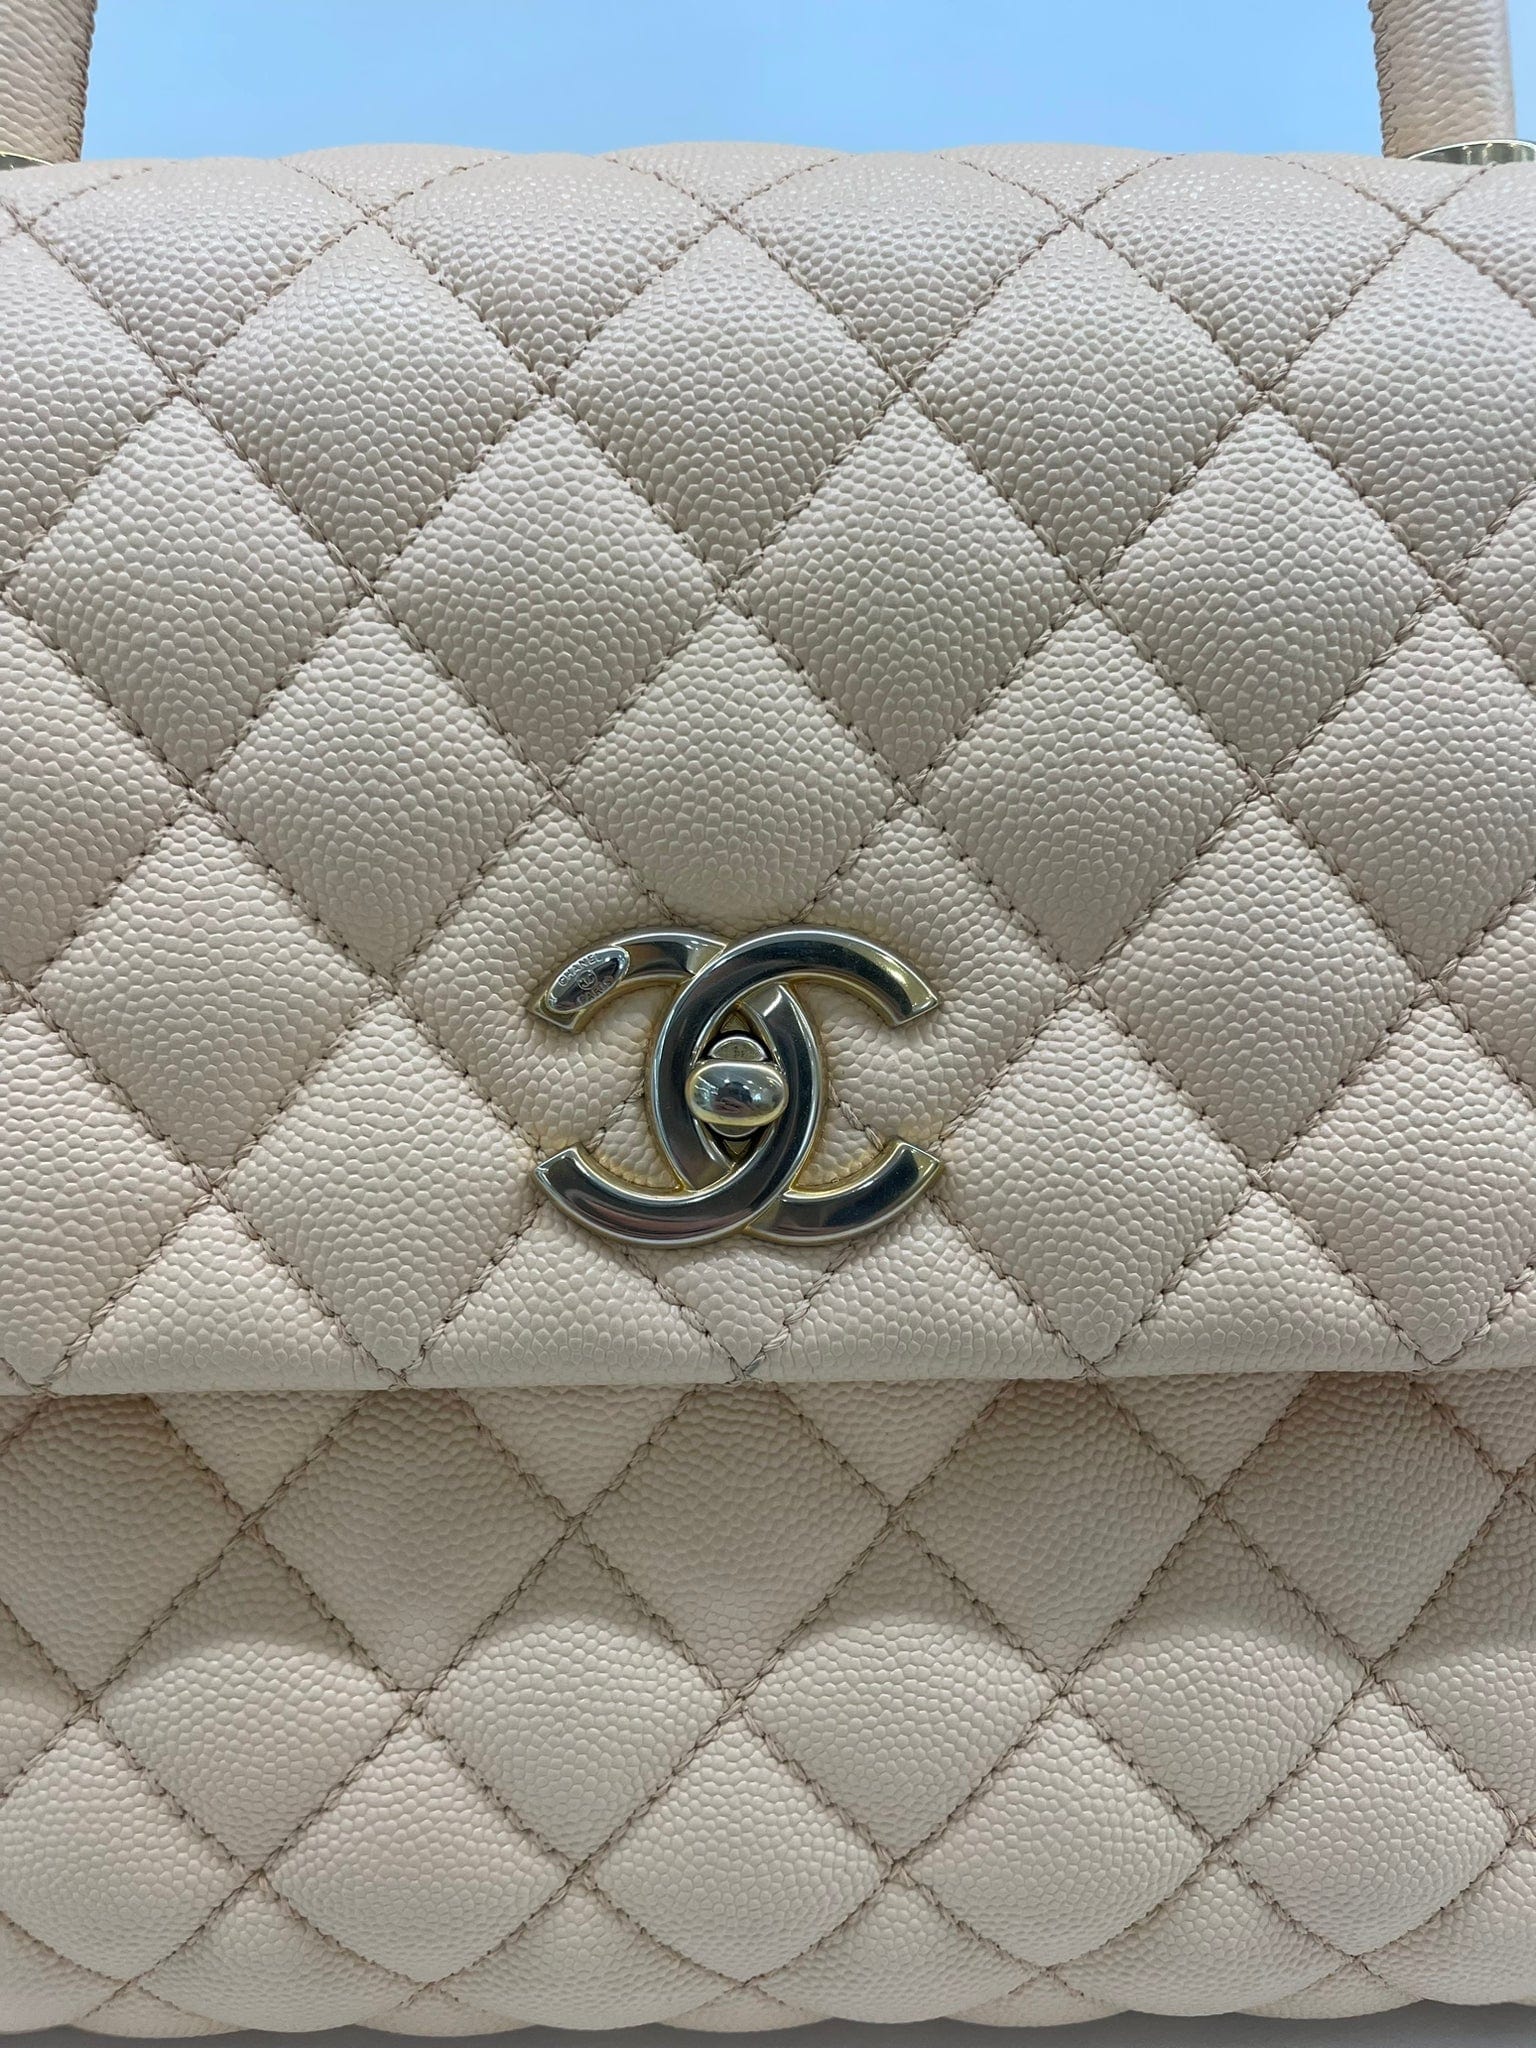 PH Luxury Consignment Chanel Top Handle Beige - Large